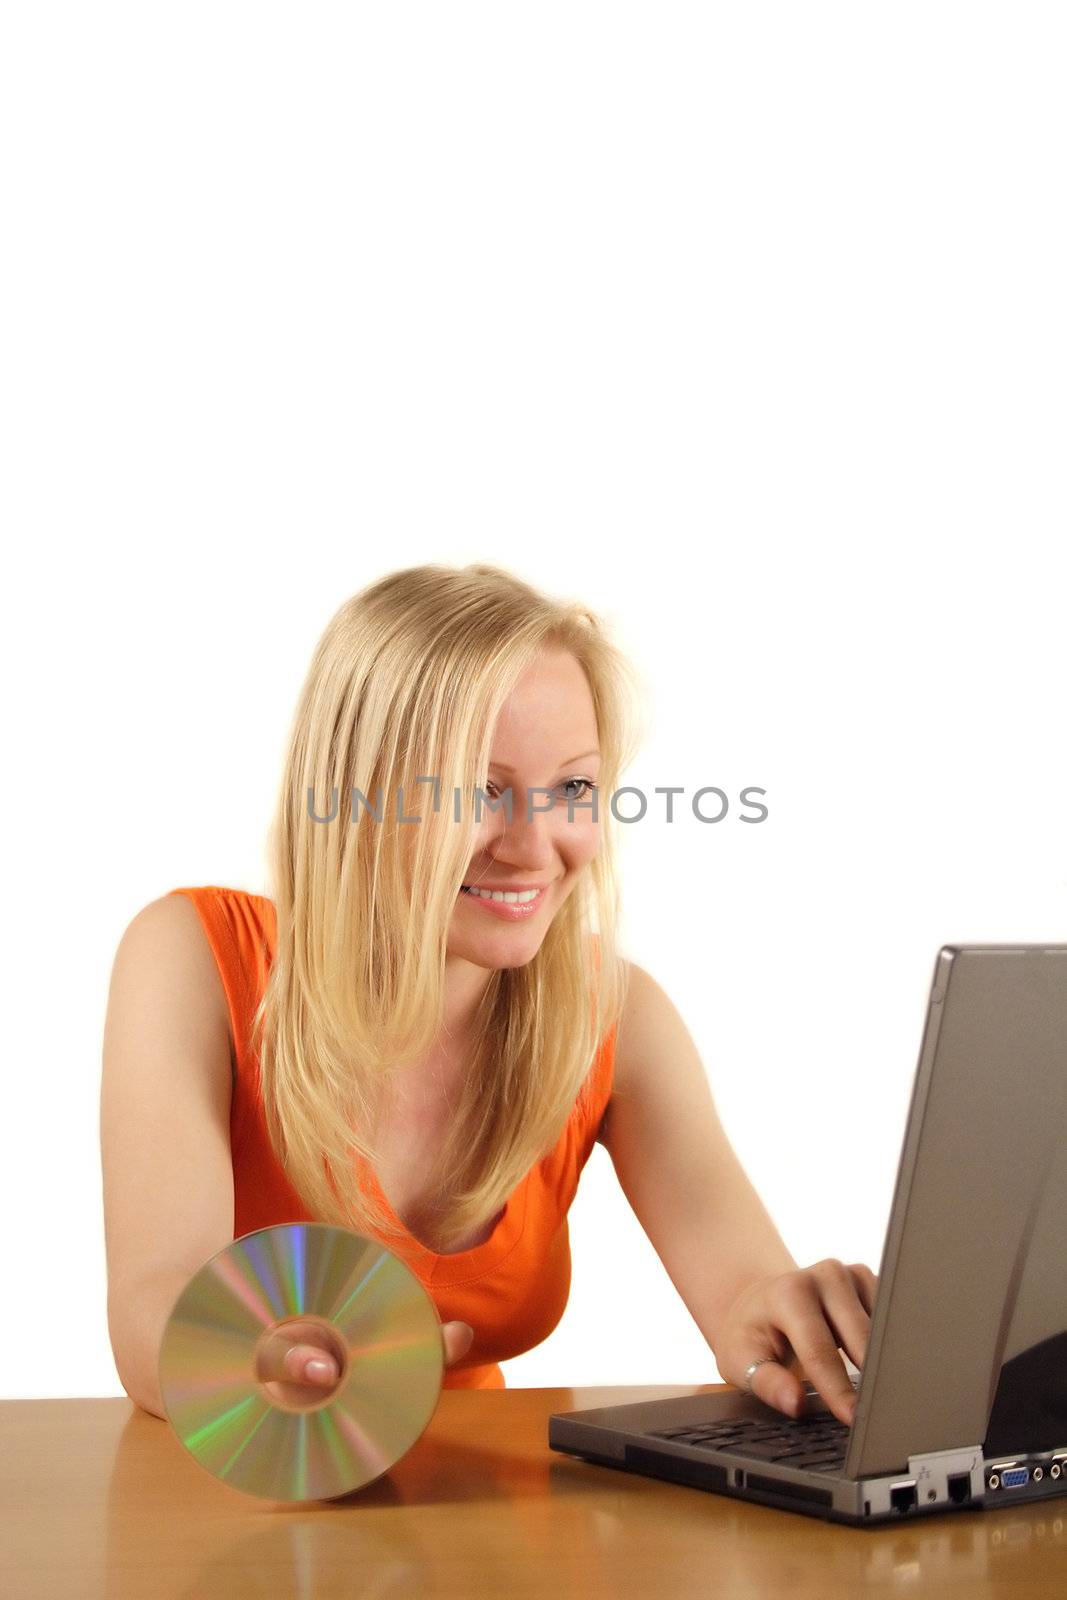 A young handsome woman installing software on her notebook computer. All islated on white background.